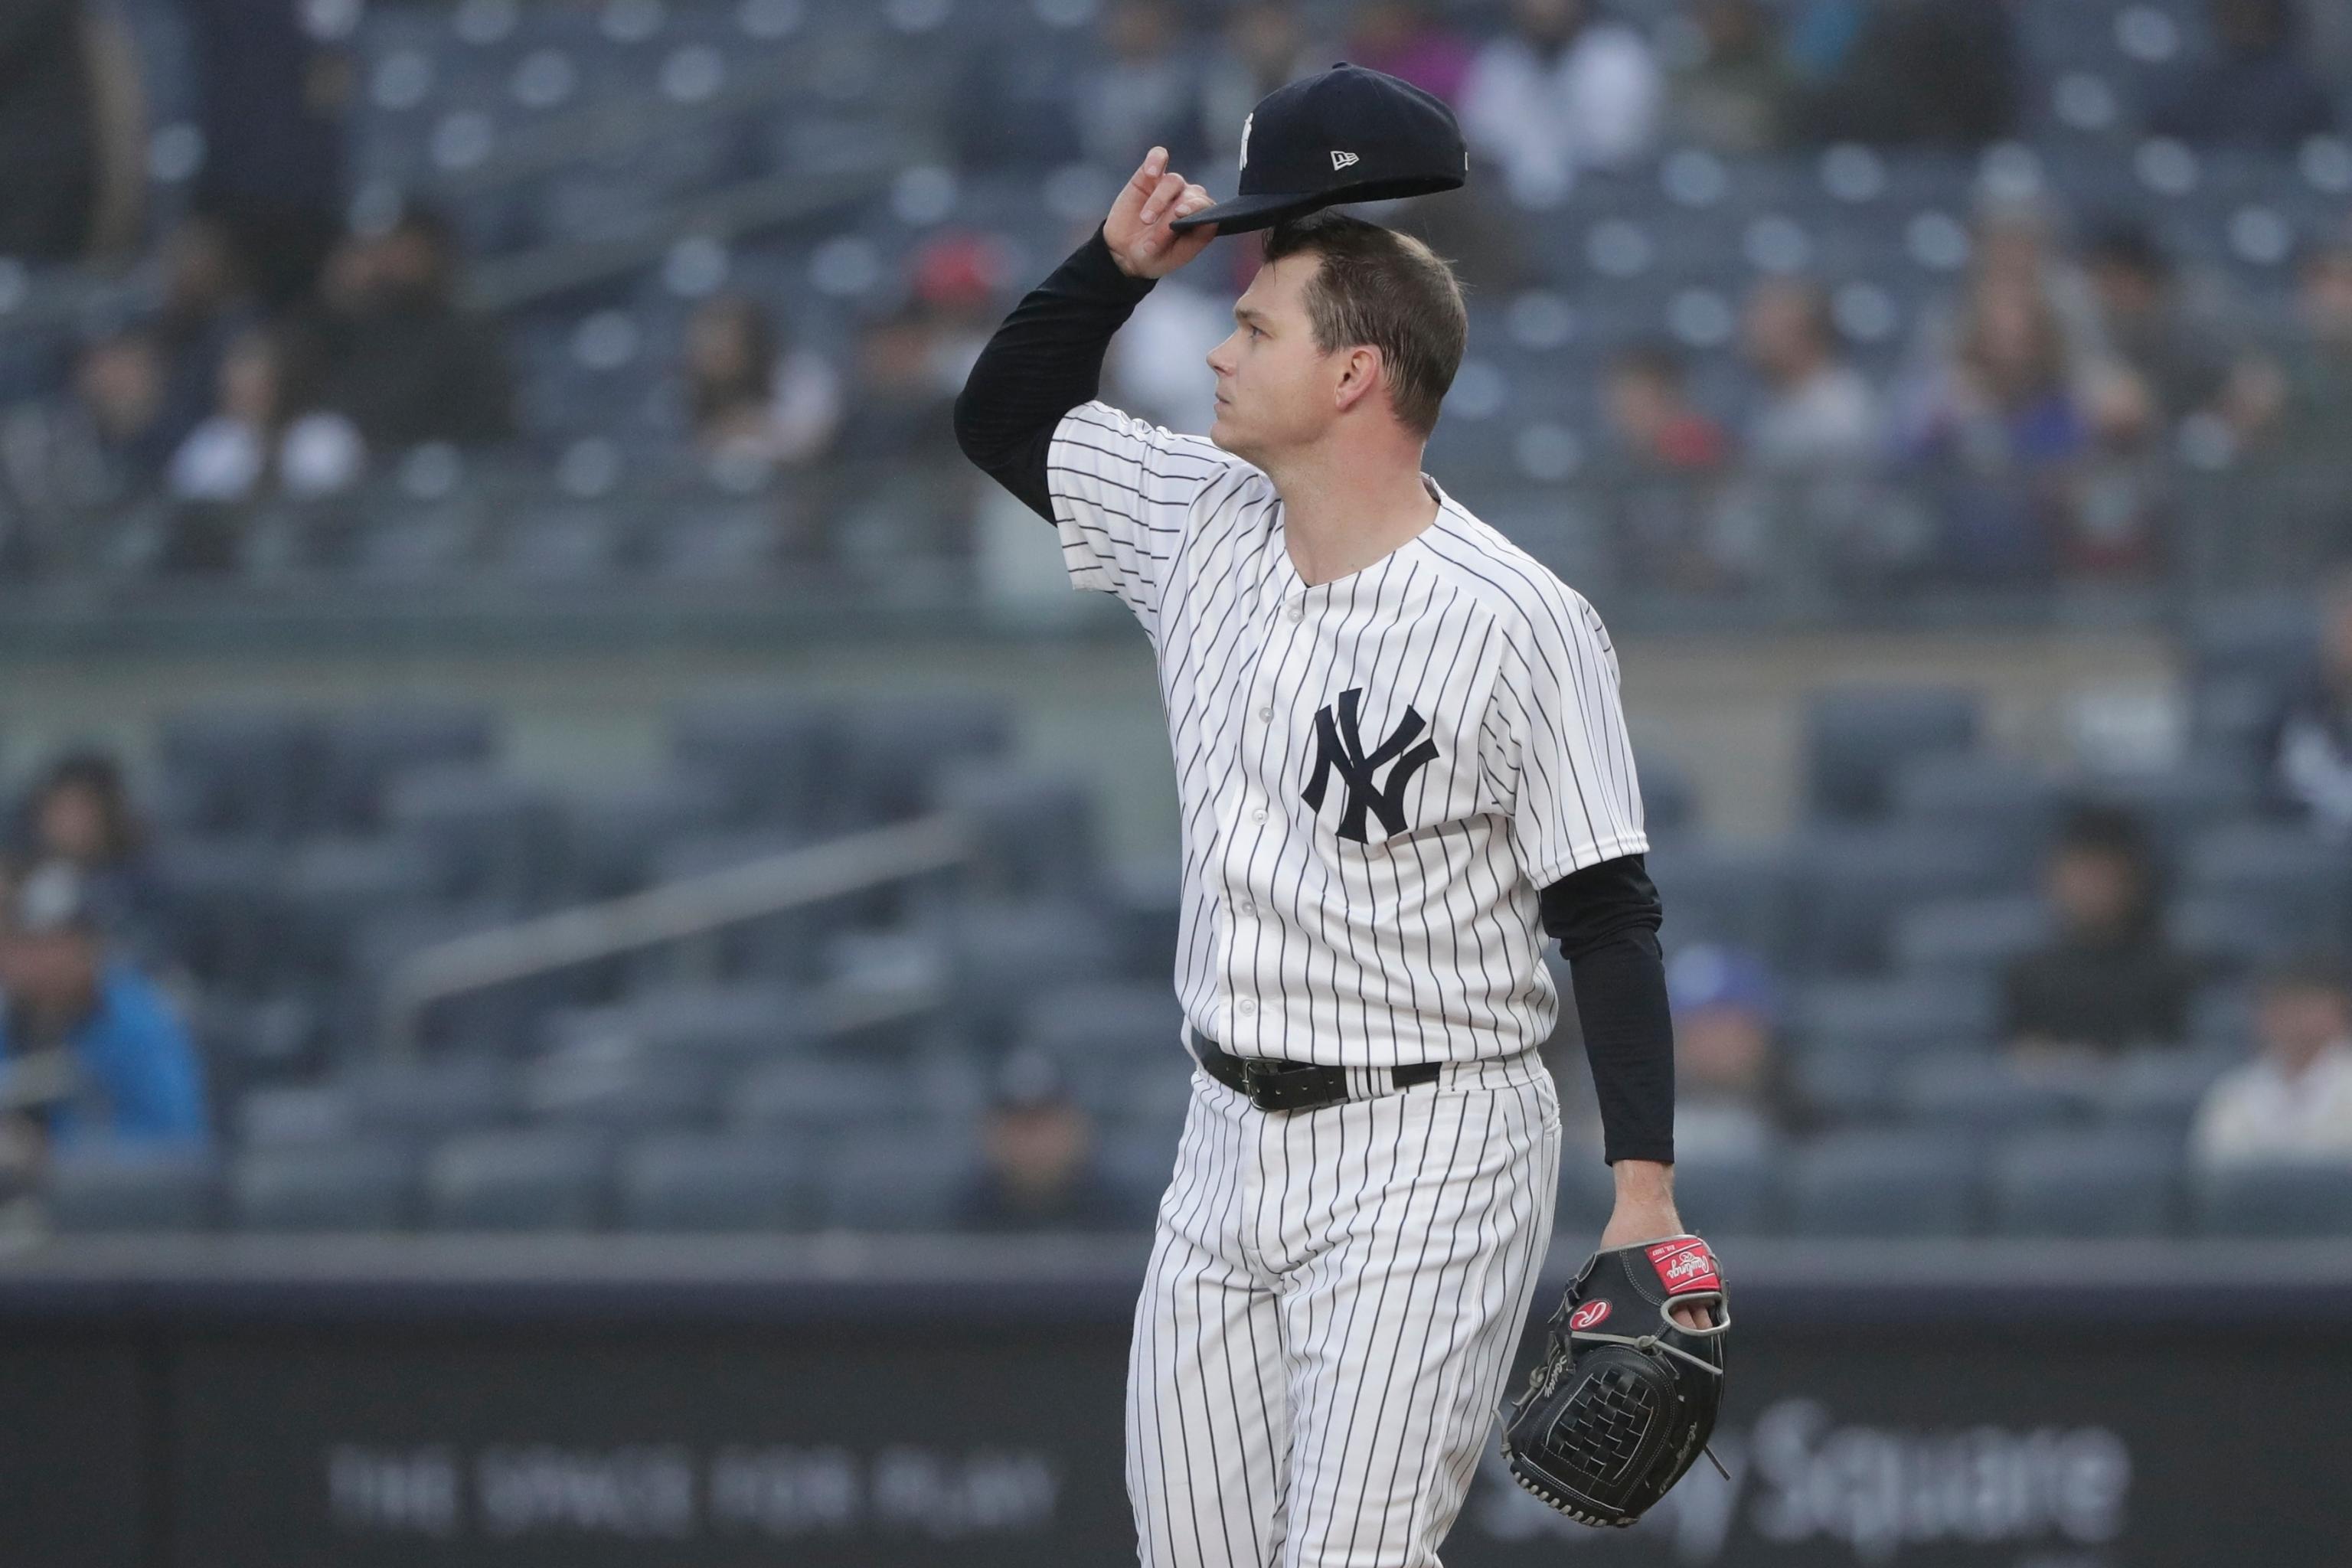 Yankees' Sonny Gray trades, years later - Pinstripe Alley